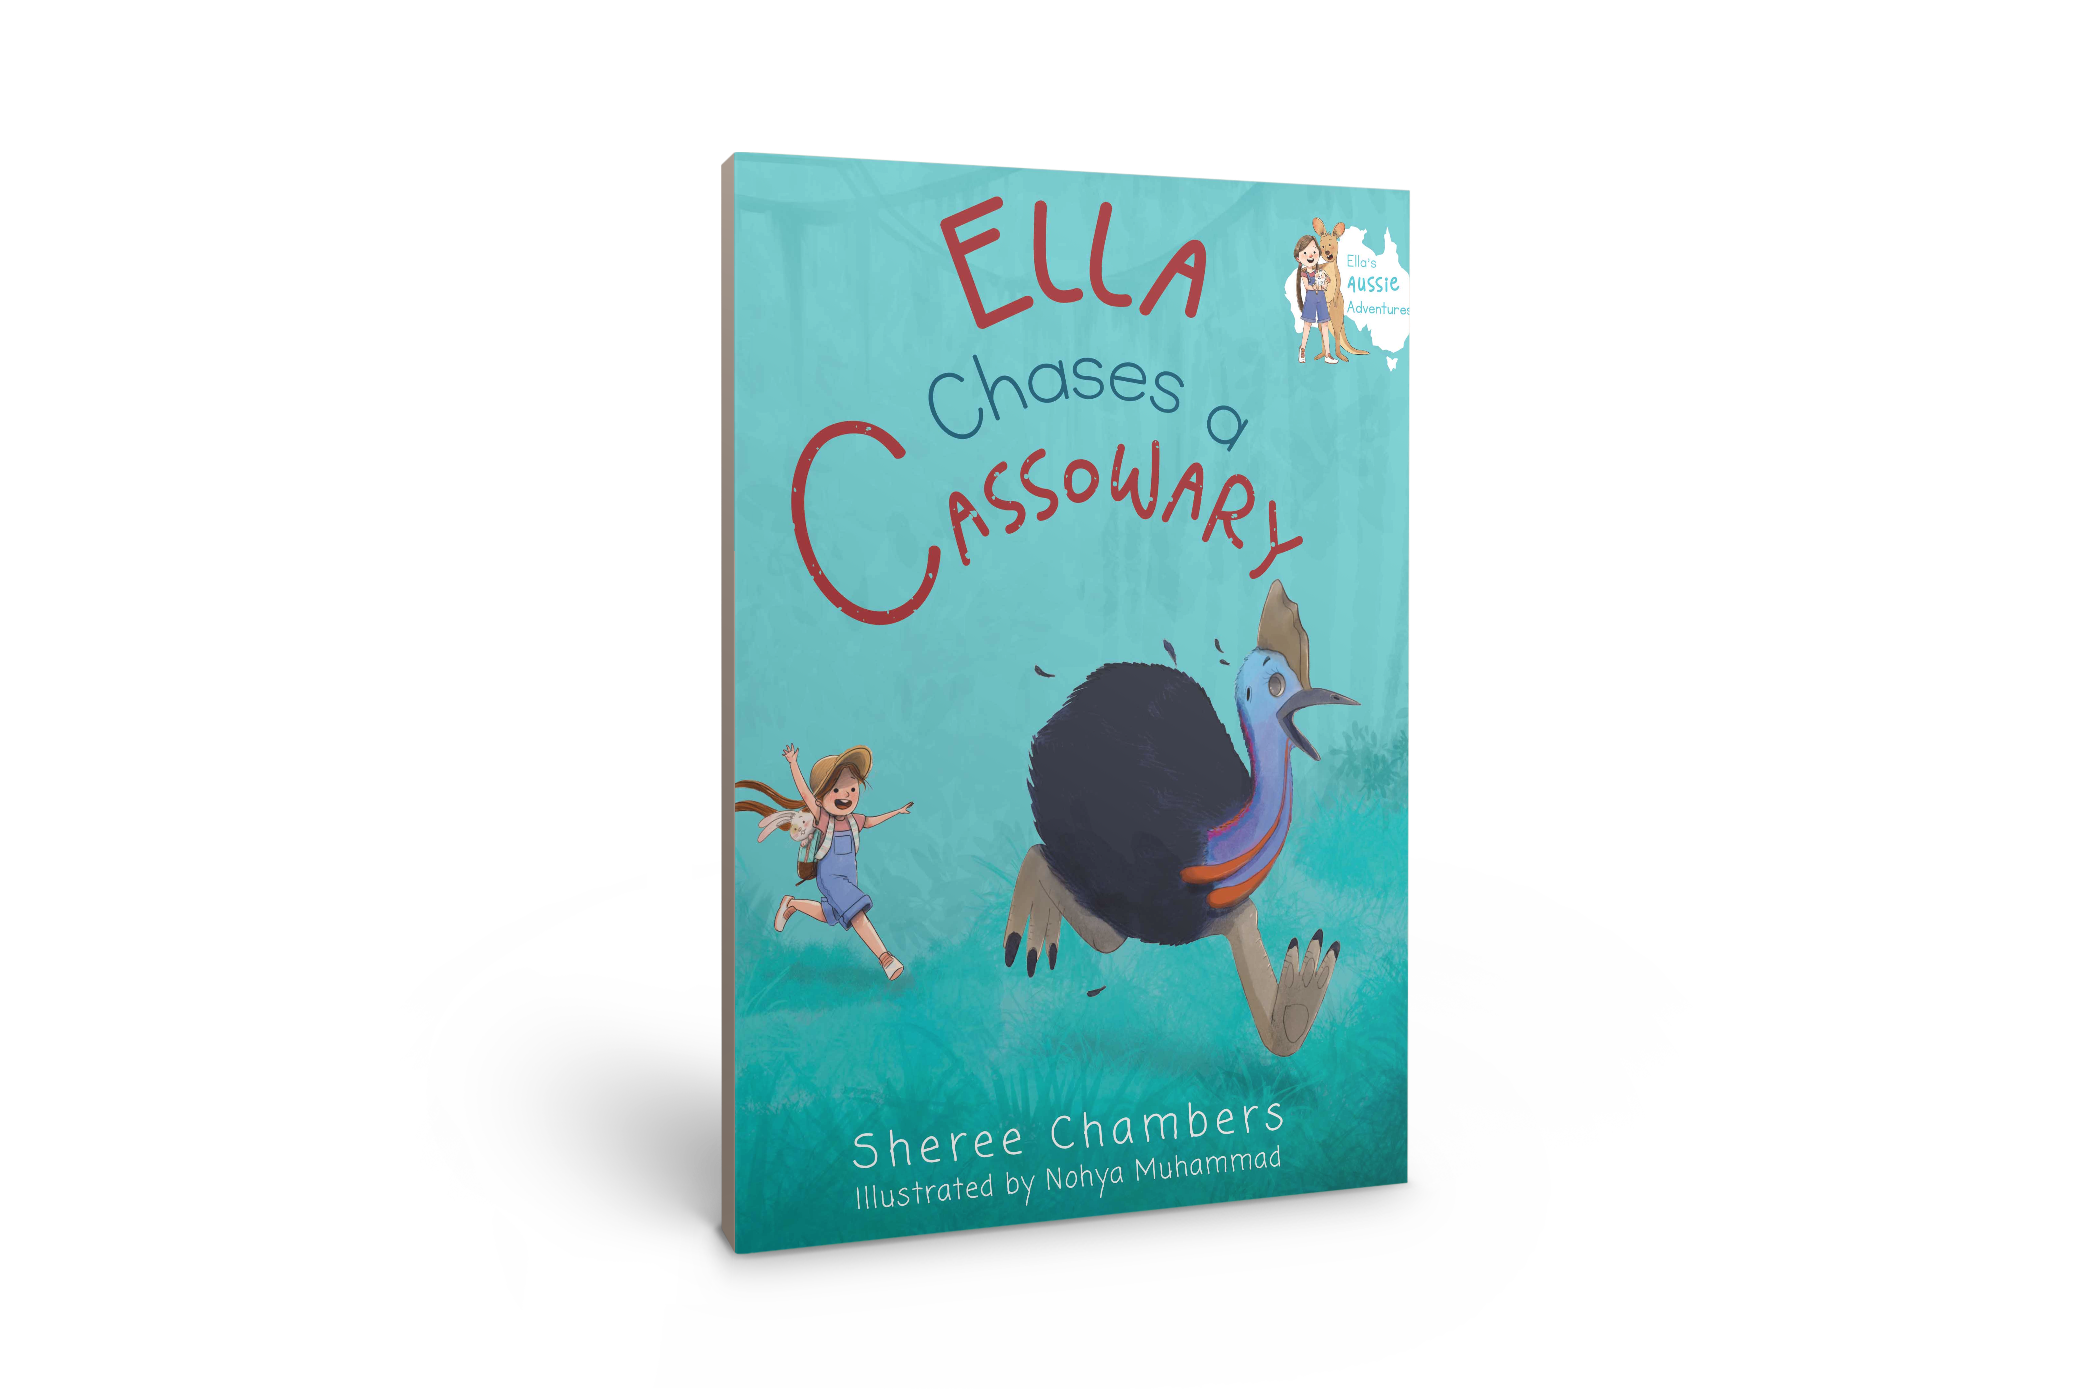 Ella Chases a Cassowary by Sheree Chambers Book Cover 3D